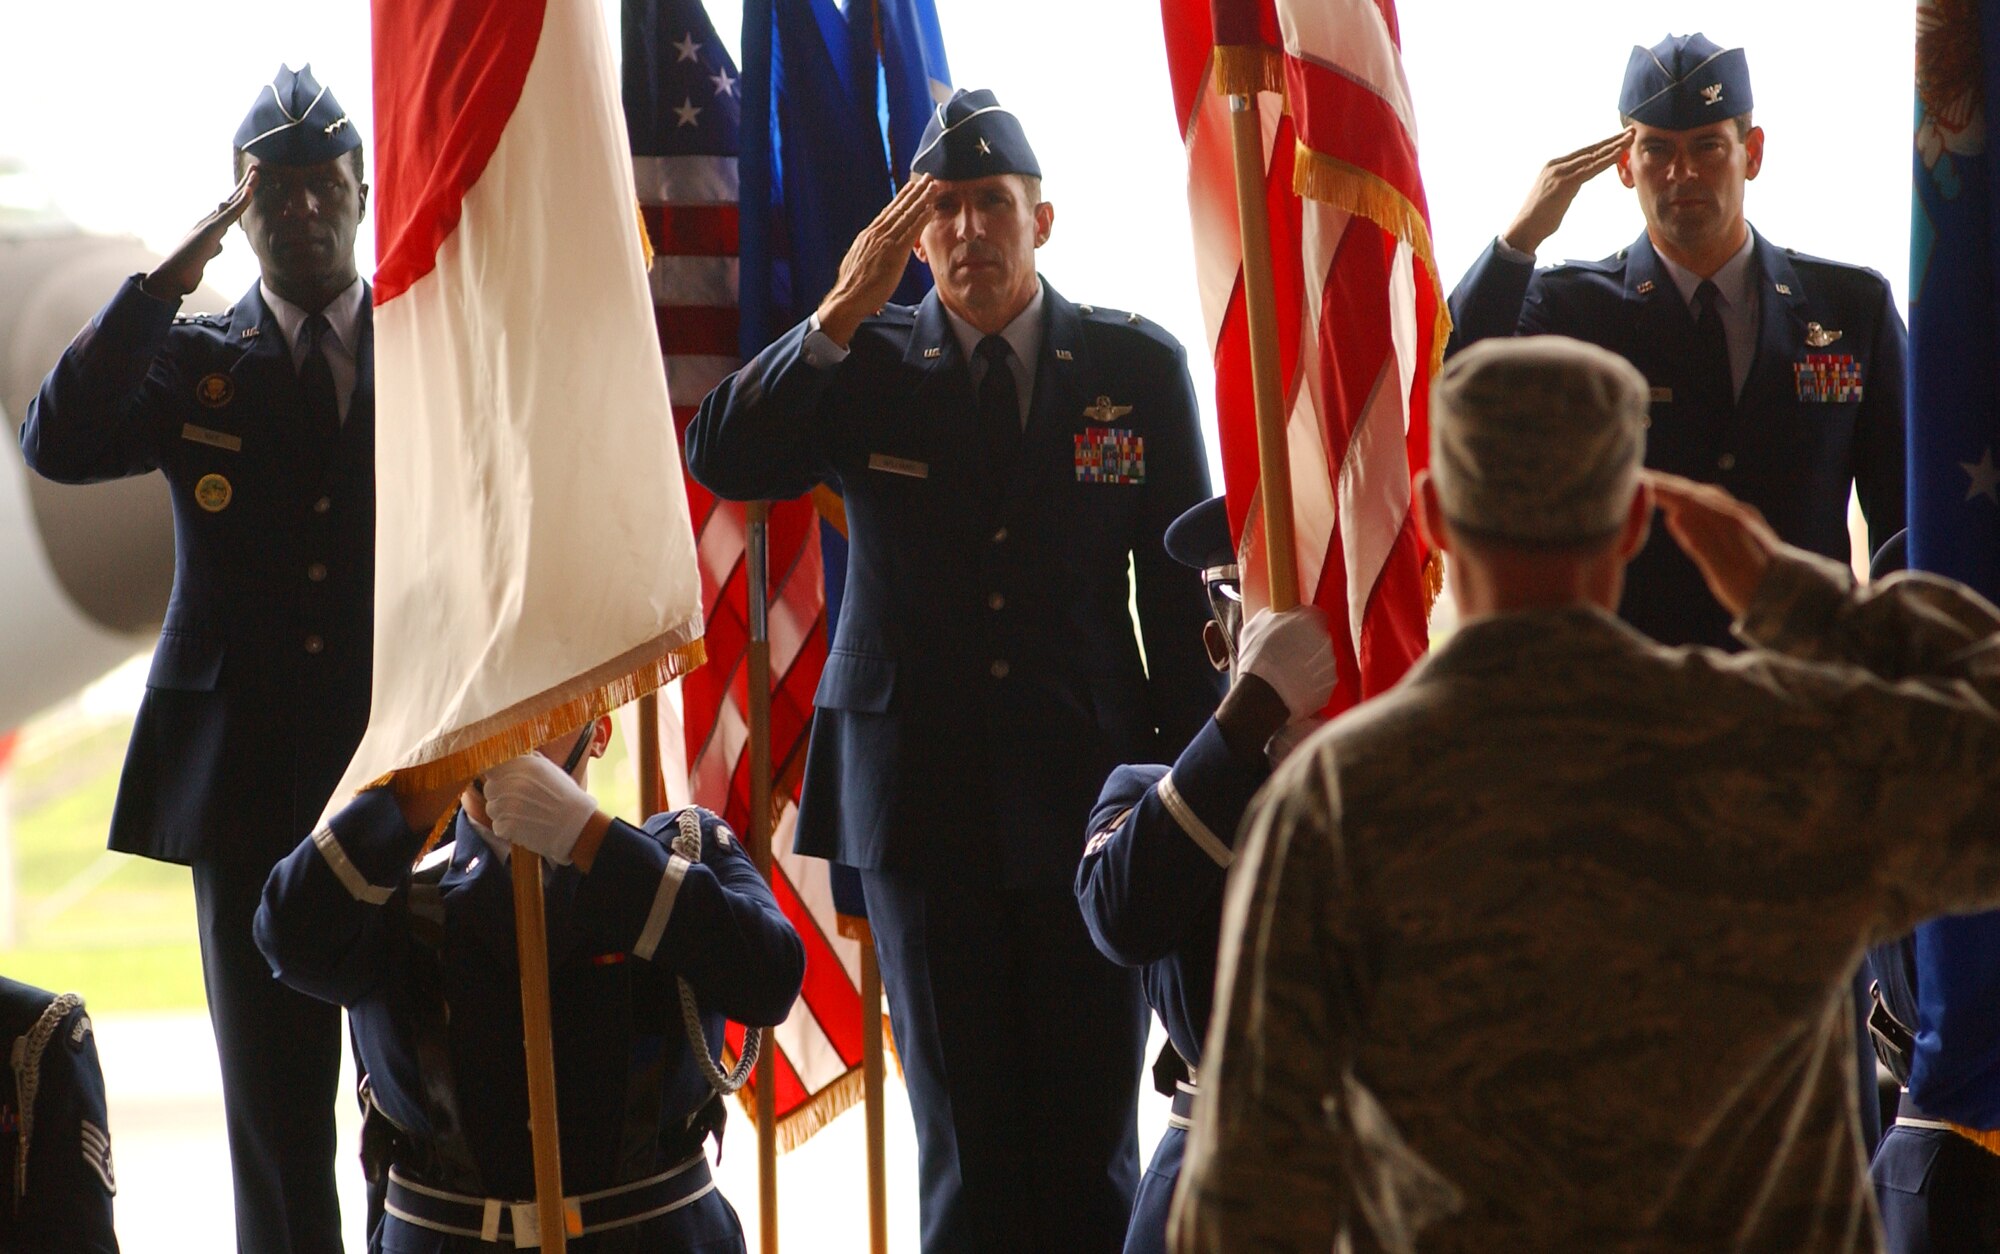 Lt. Gen. Edward Rice, commander of U.S. Forces Japan and 5th Air Force,  Gen. Brett Williams and Col. Kenneth Wilsbach salute the colors at the beginning of the change of command July 9 at Kadena Air Base, Japan. (U.S. Air Force photo/Tech. Sgt. Rey Ramon) 